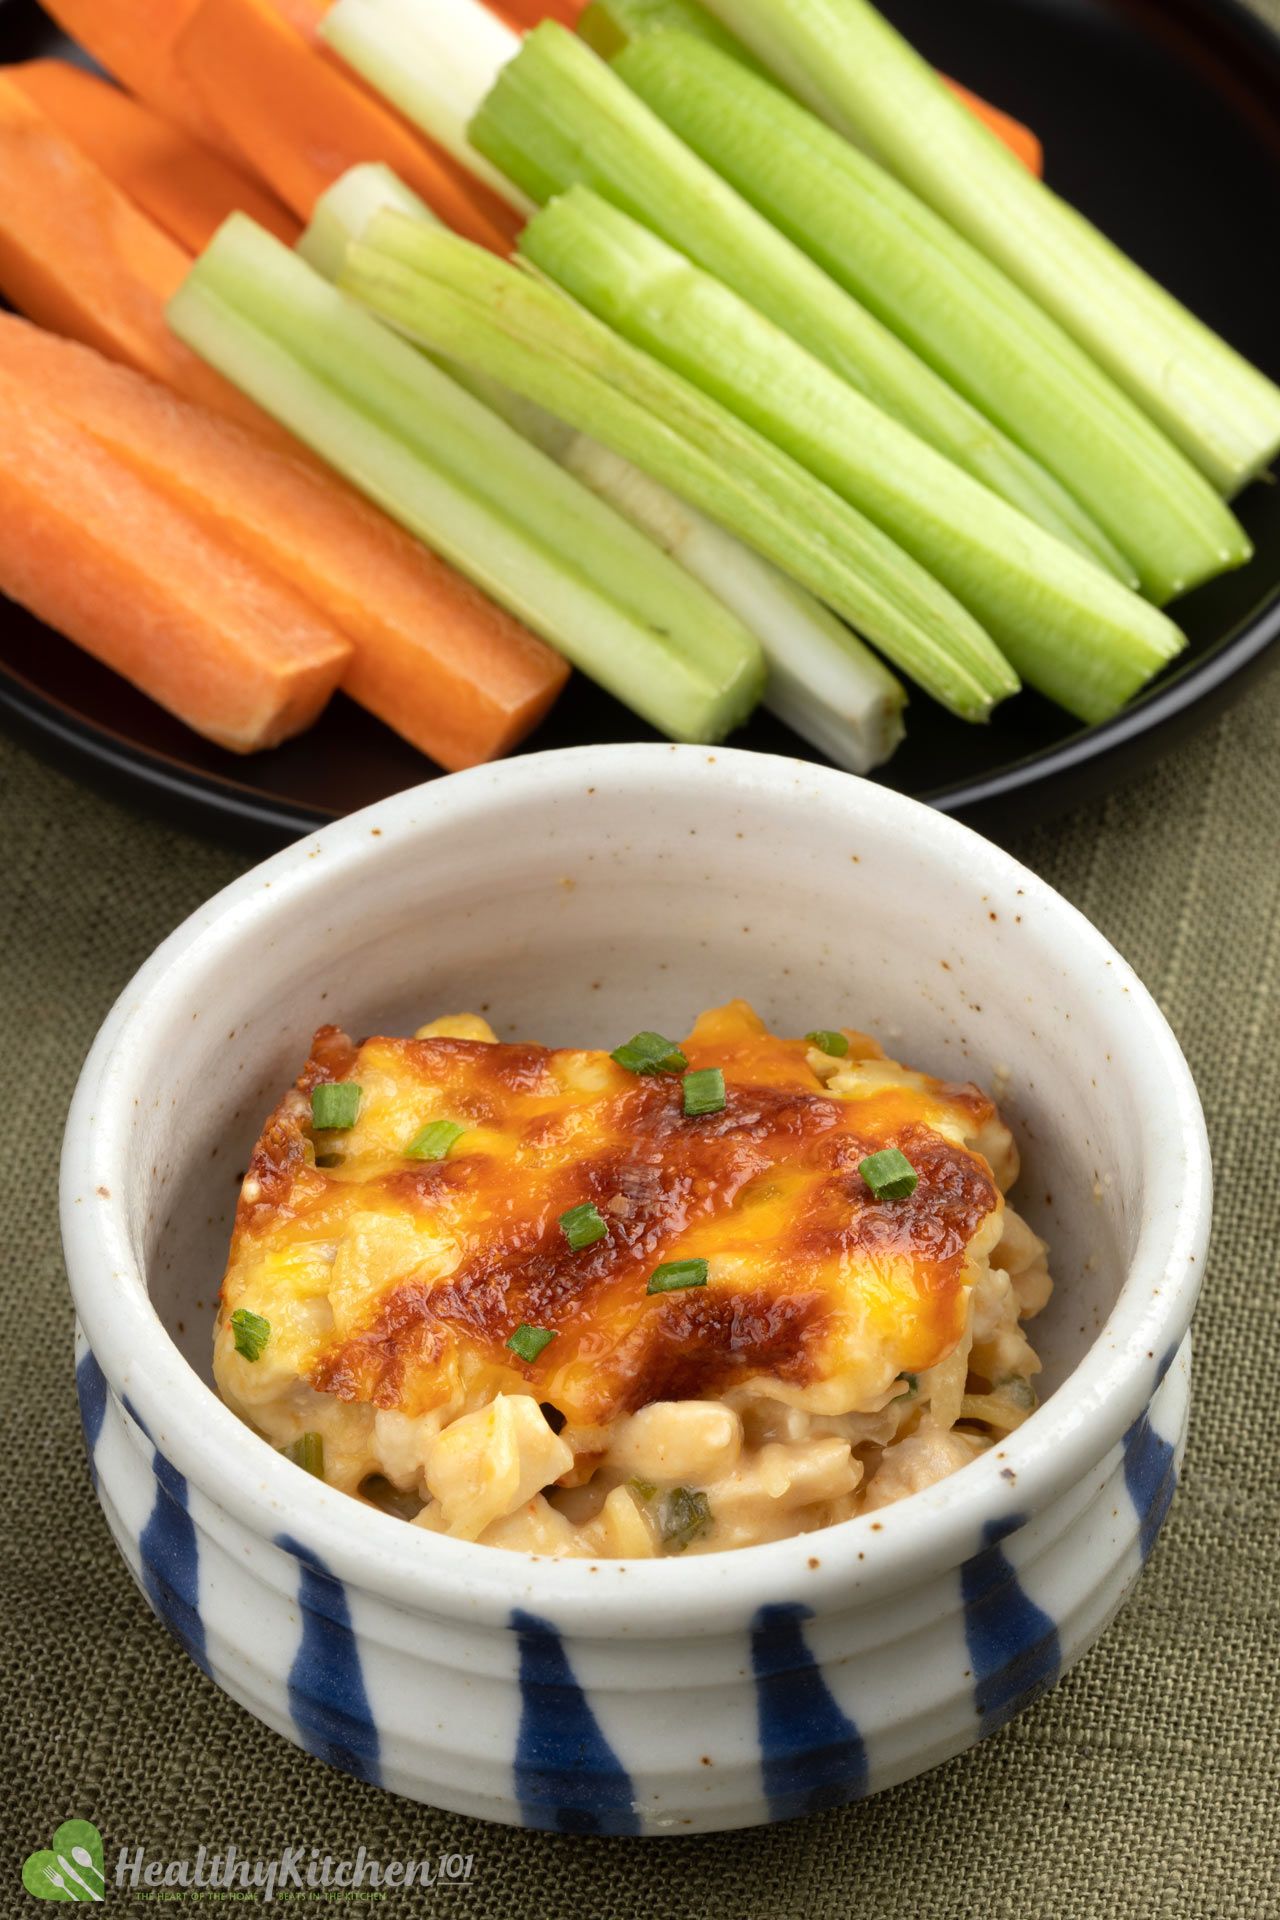 What Goes with Buffalo Chicken Dip?